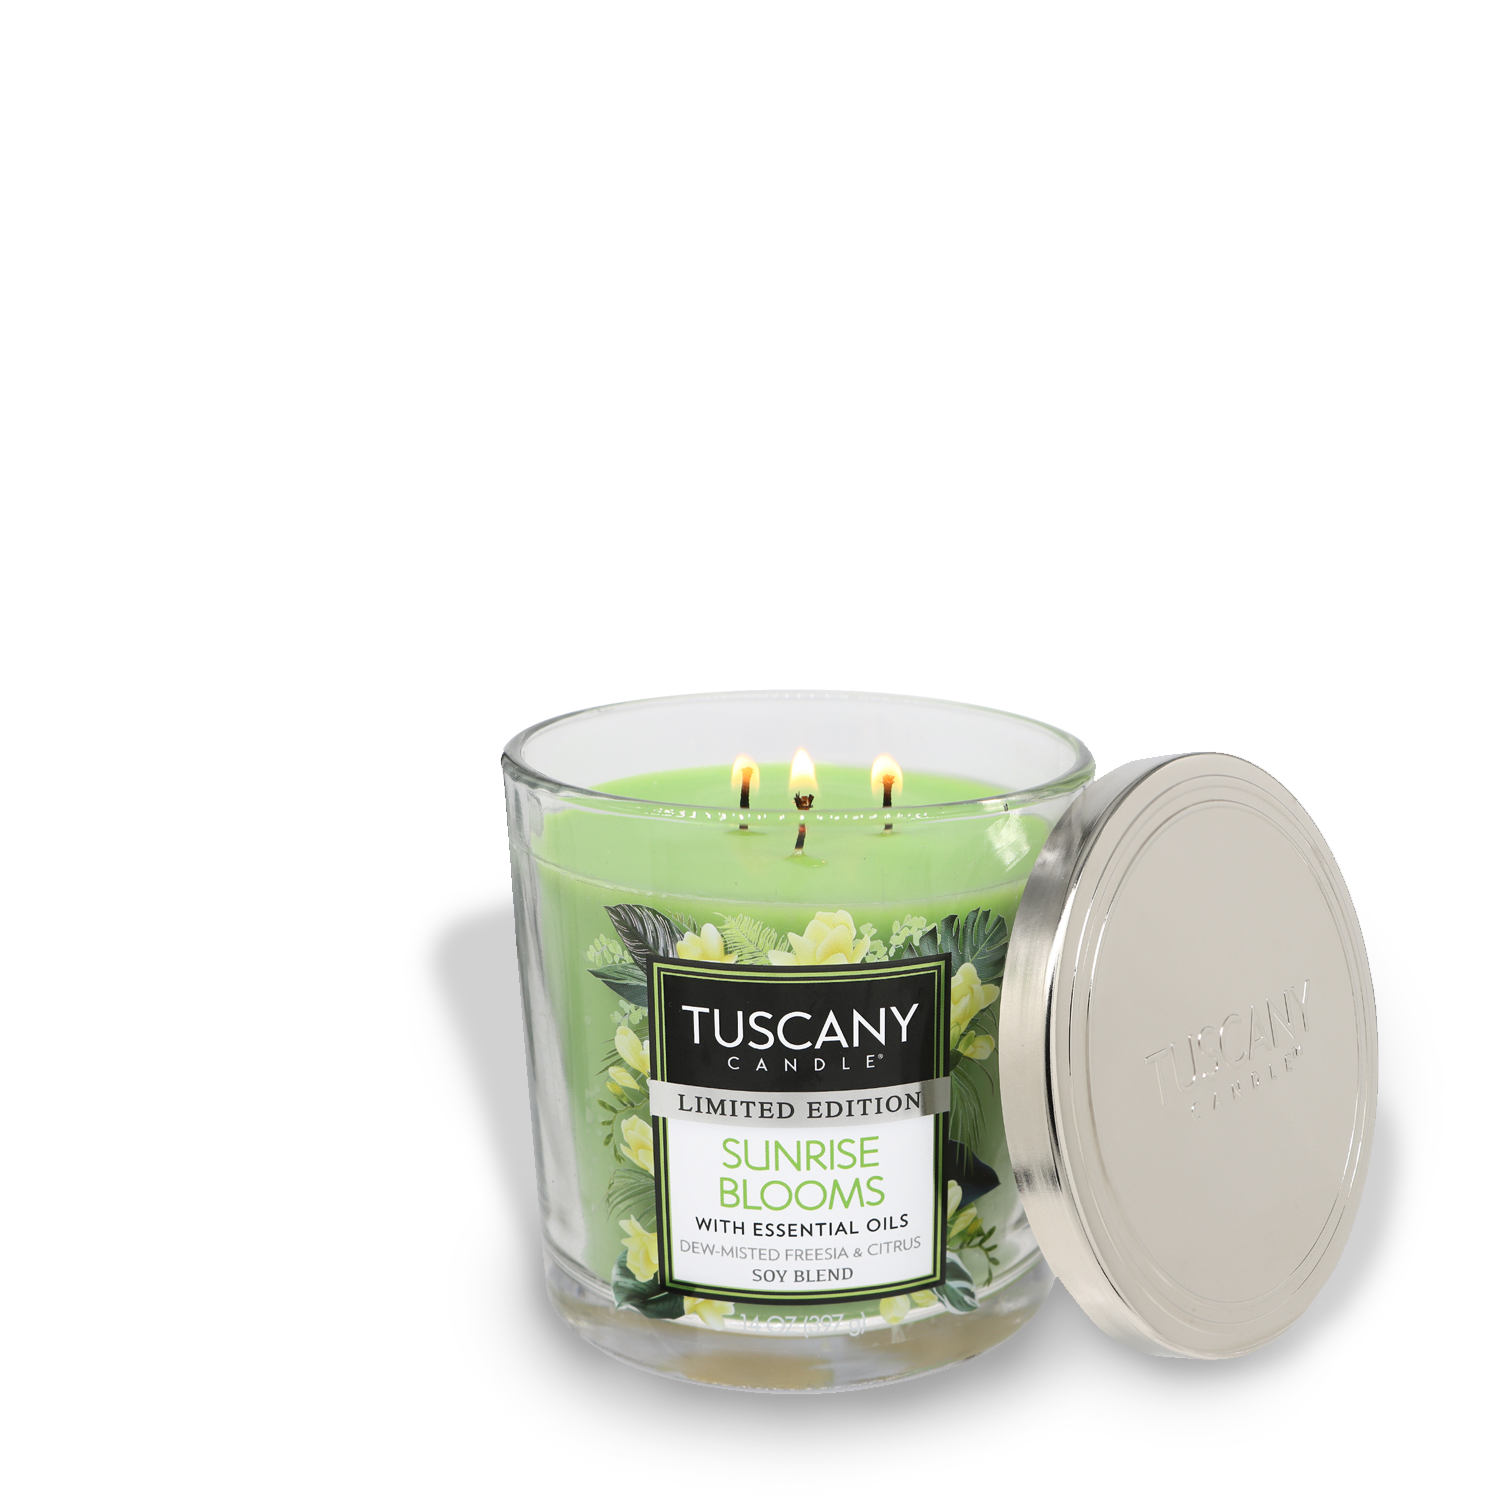 A three-wick Sunrise Blooms Long-Lasting Scented Jar Candle (14 oz) with essential oils by Tuscany Candle® SEASONAL from the limited edition series called "Sunrise Blooms" with the cover off, displayed against a white background.